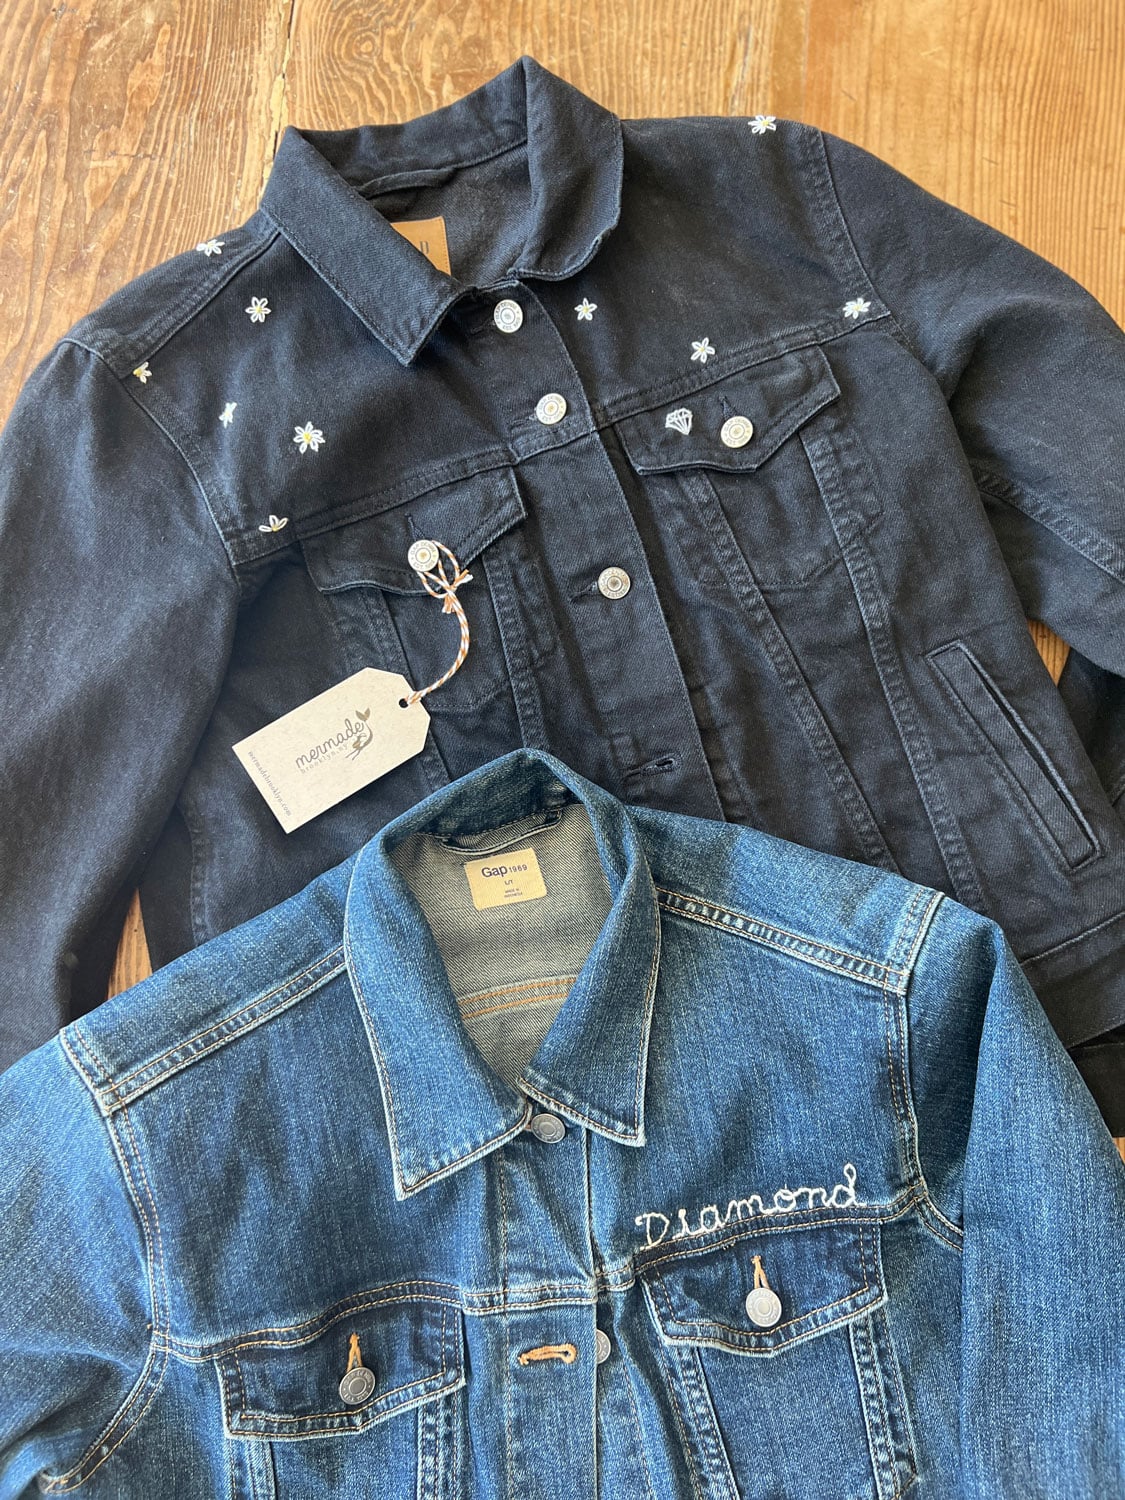 Buy Ministitch Kids Denim Jacket with Sleeveless Tshirt For Boys | Trendy &  Stylish Jacket | Regular Fit, Long sleeves, Buttoned Jacket (2-3 Years,  Navy Blue) at Amazon.in